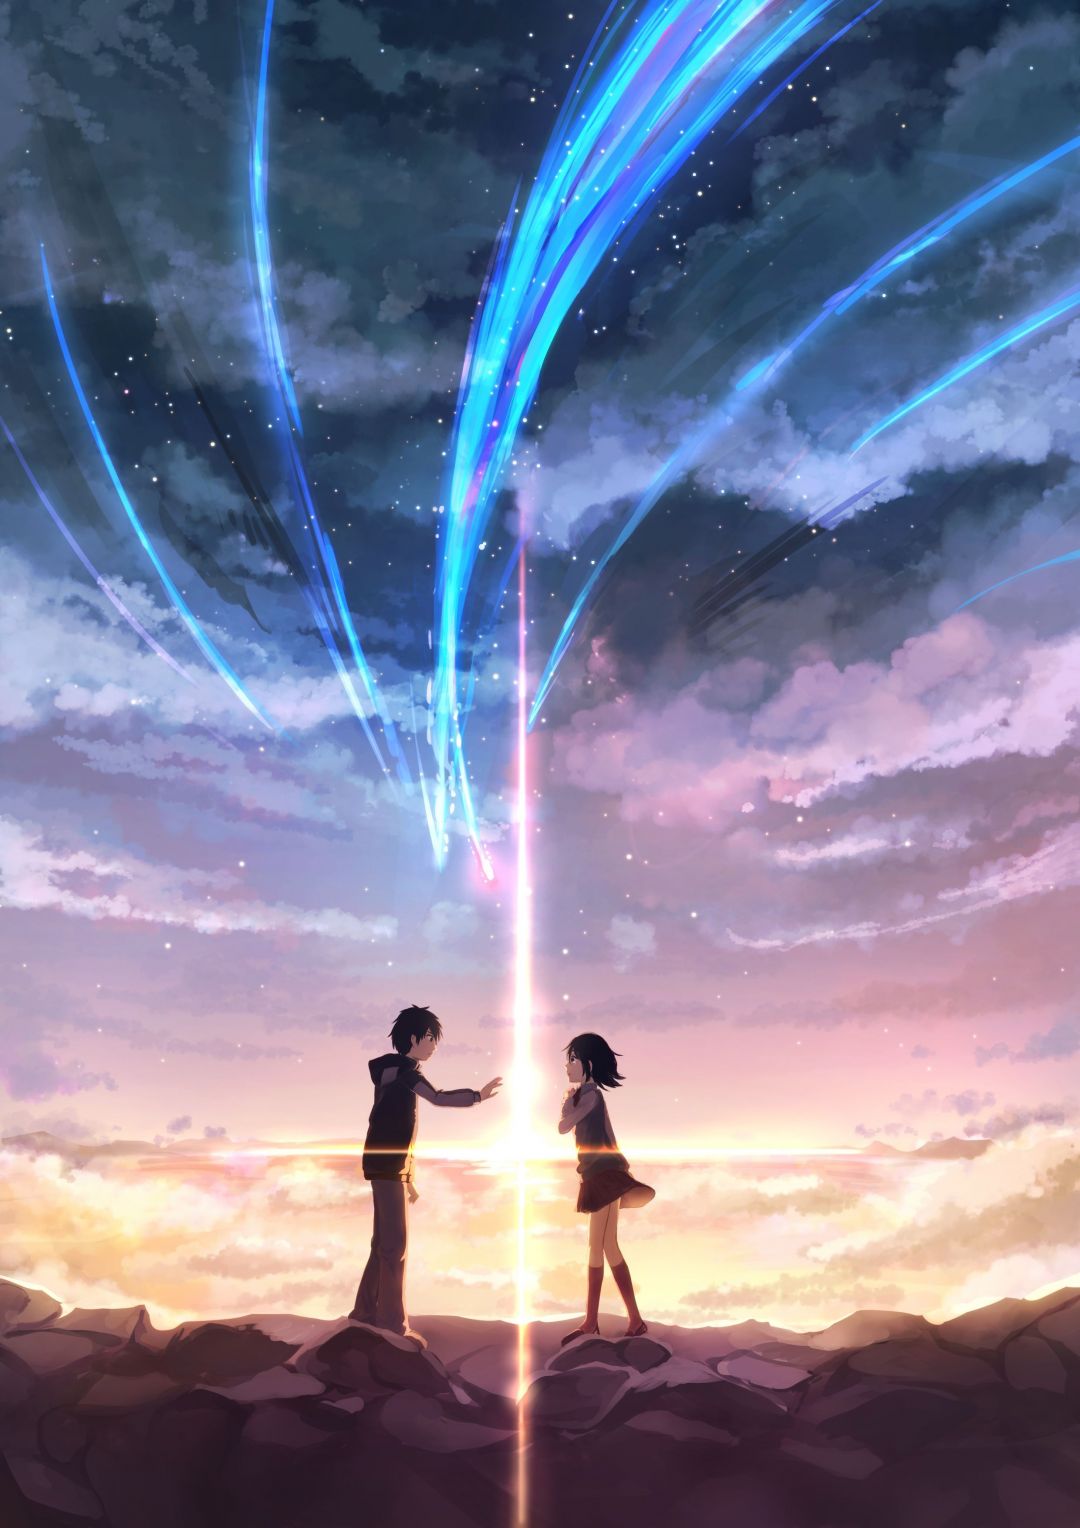 [240] Your Name Anime   Android iPhone Desktop HD Backgrounds